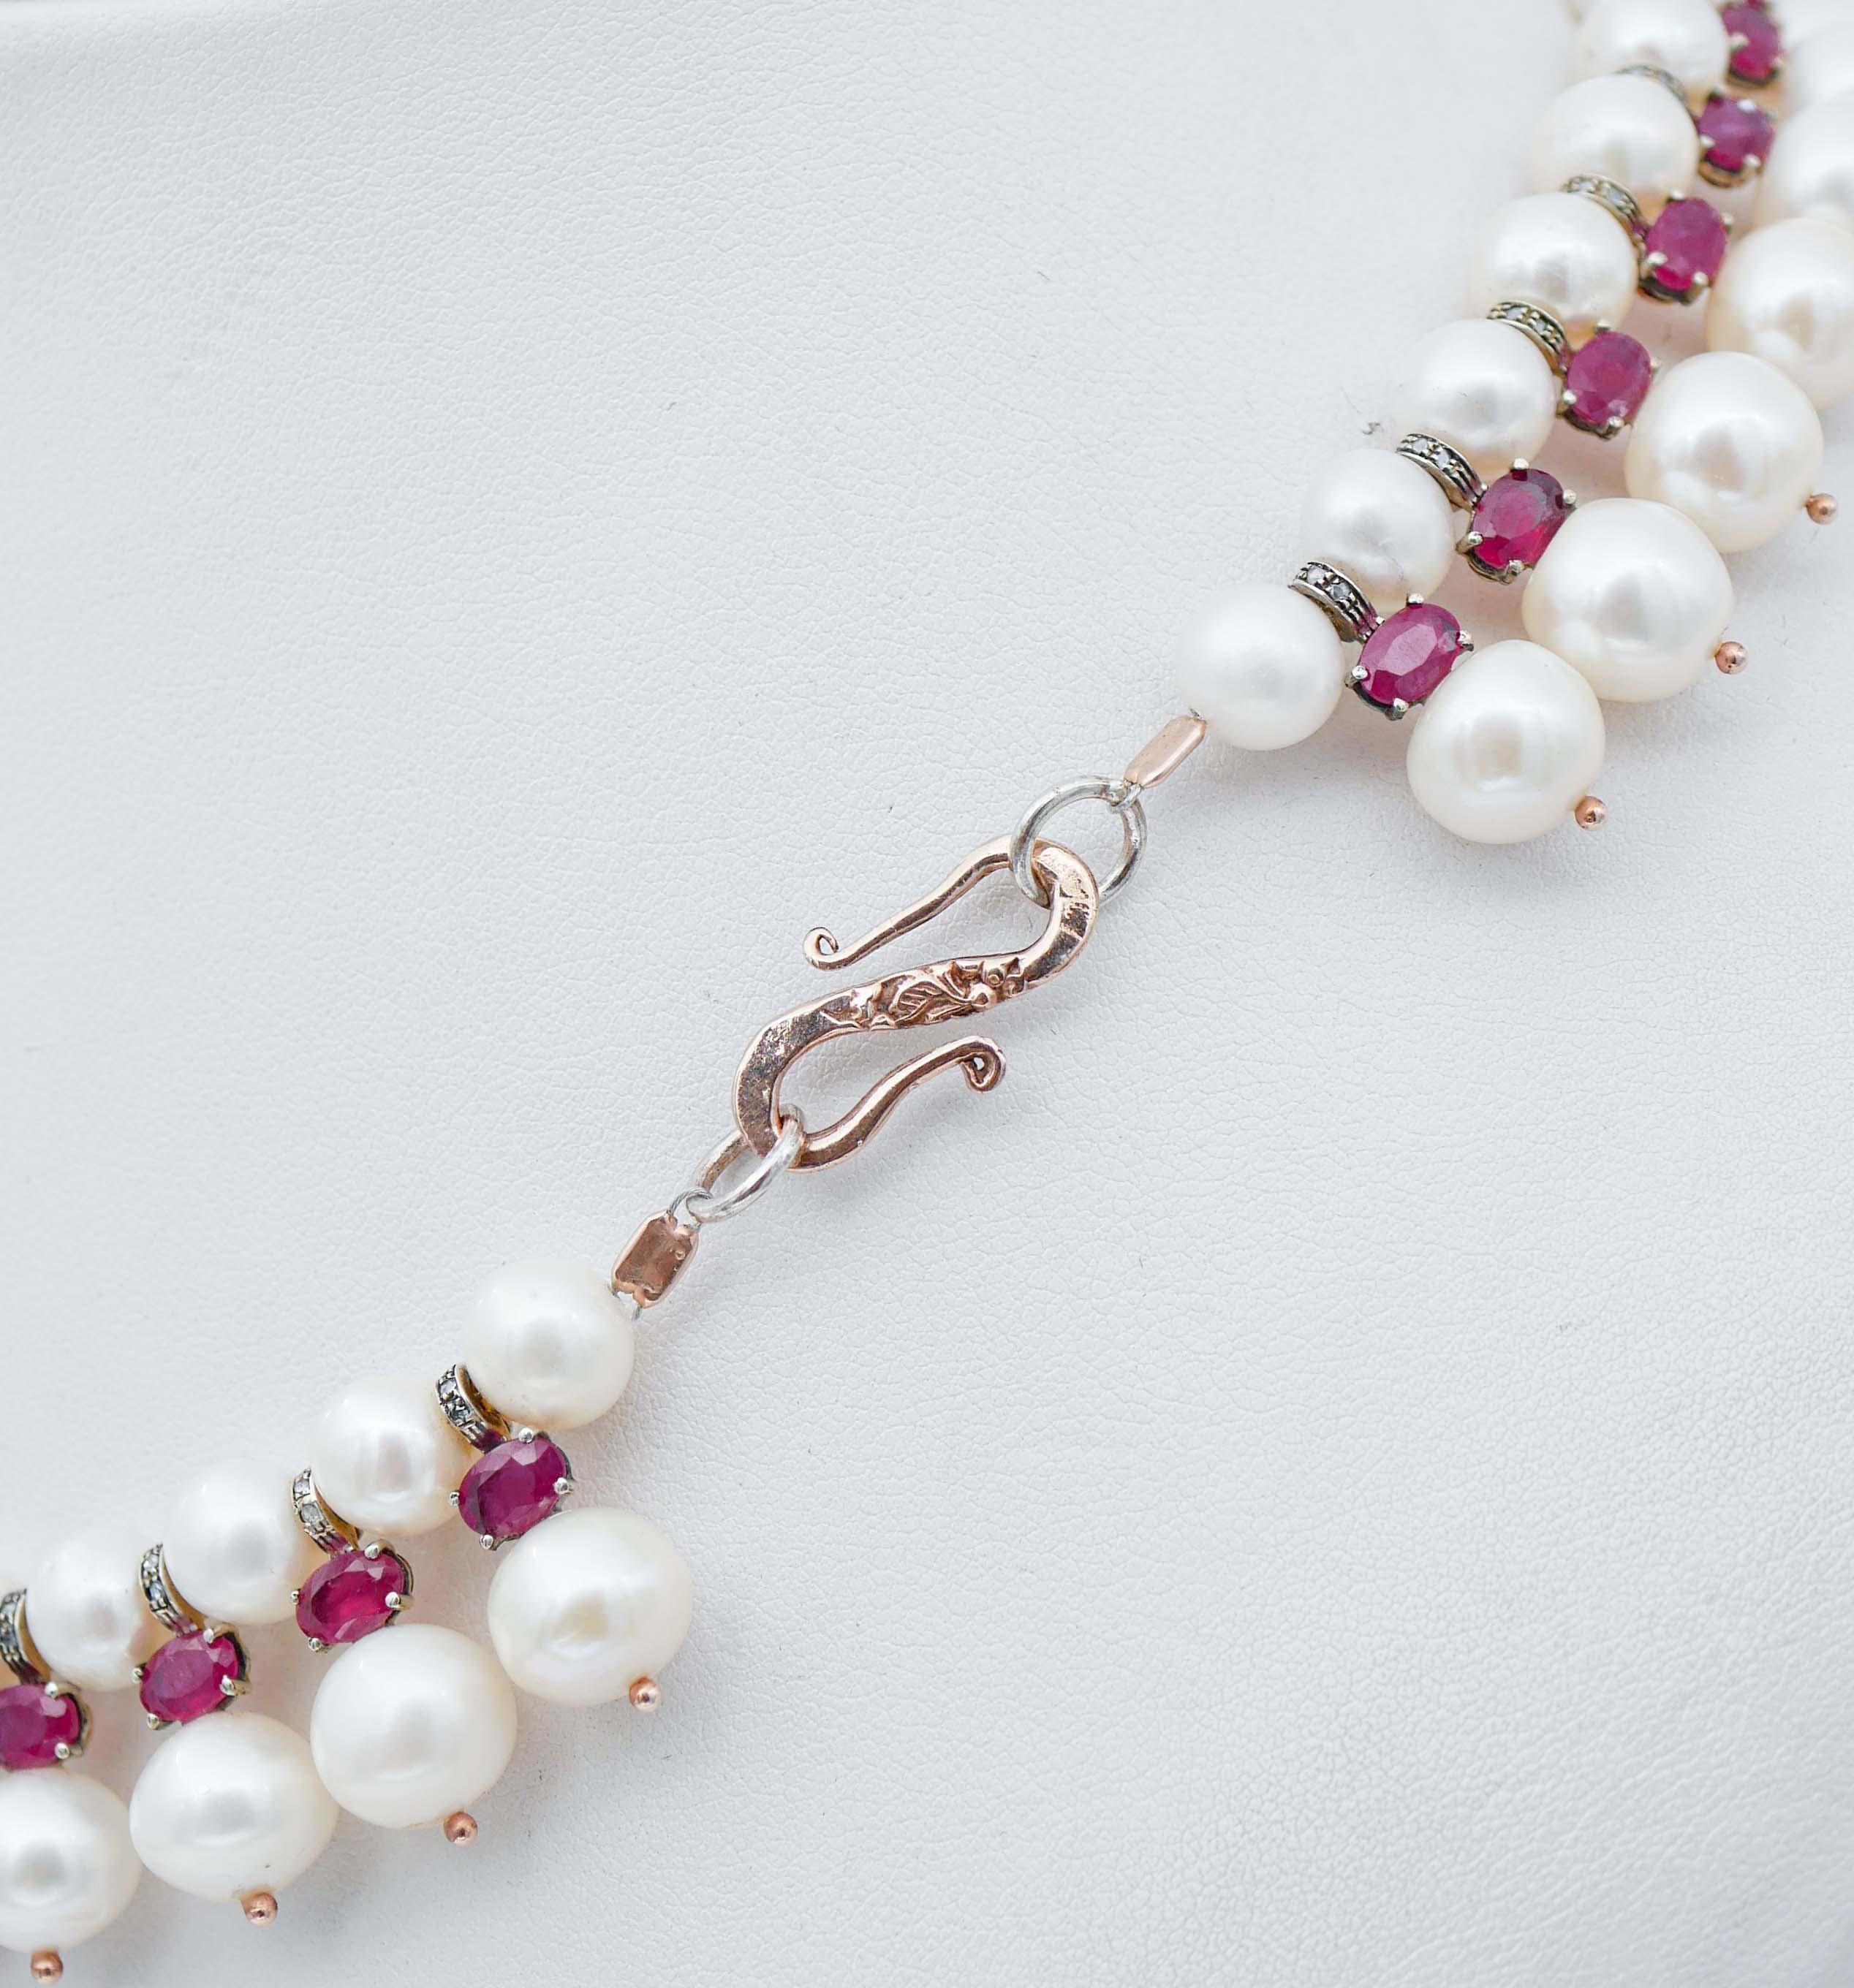 rubies and pearls necklace